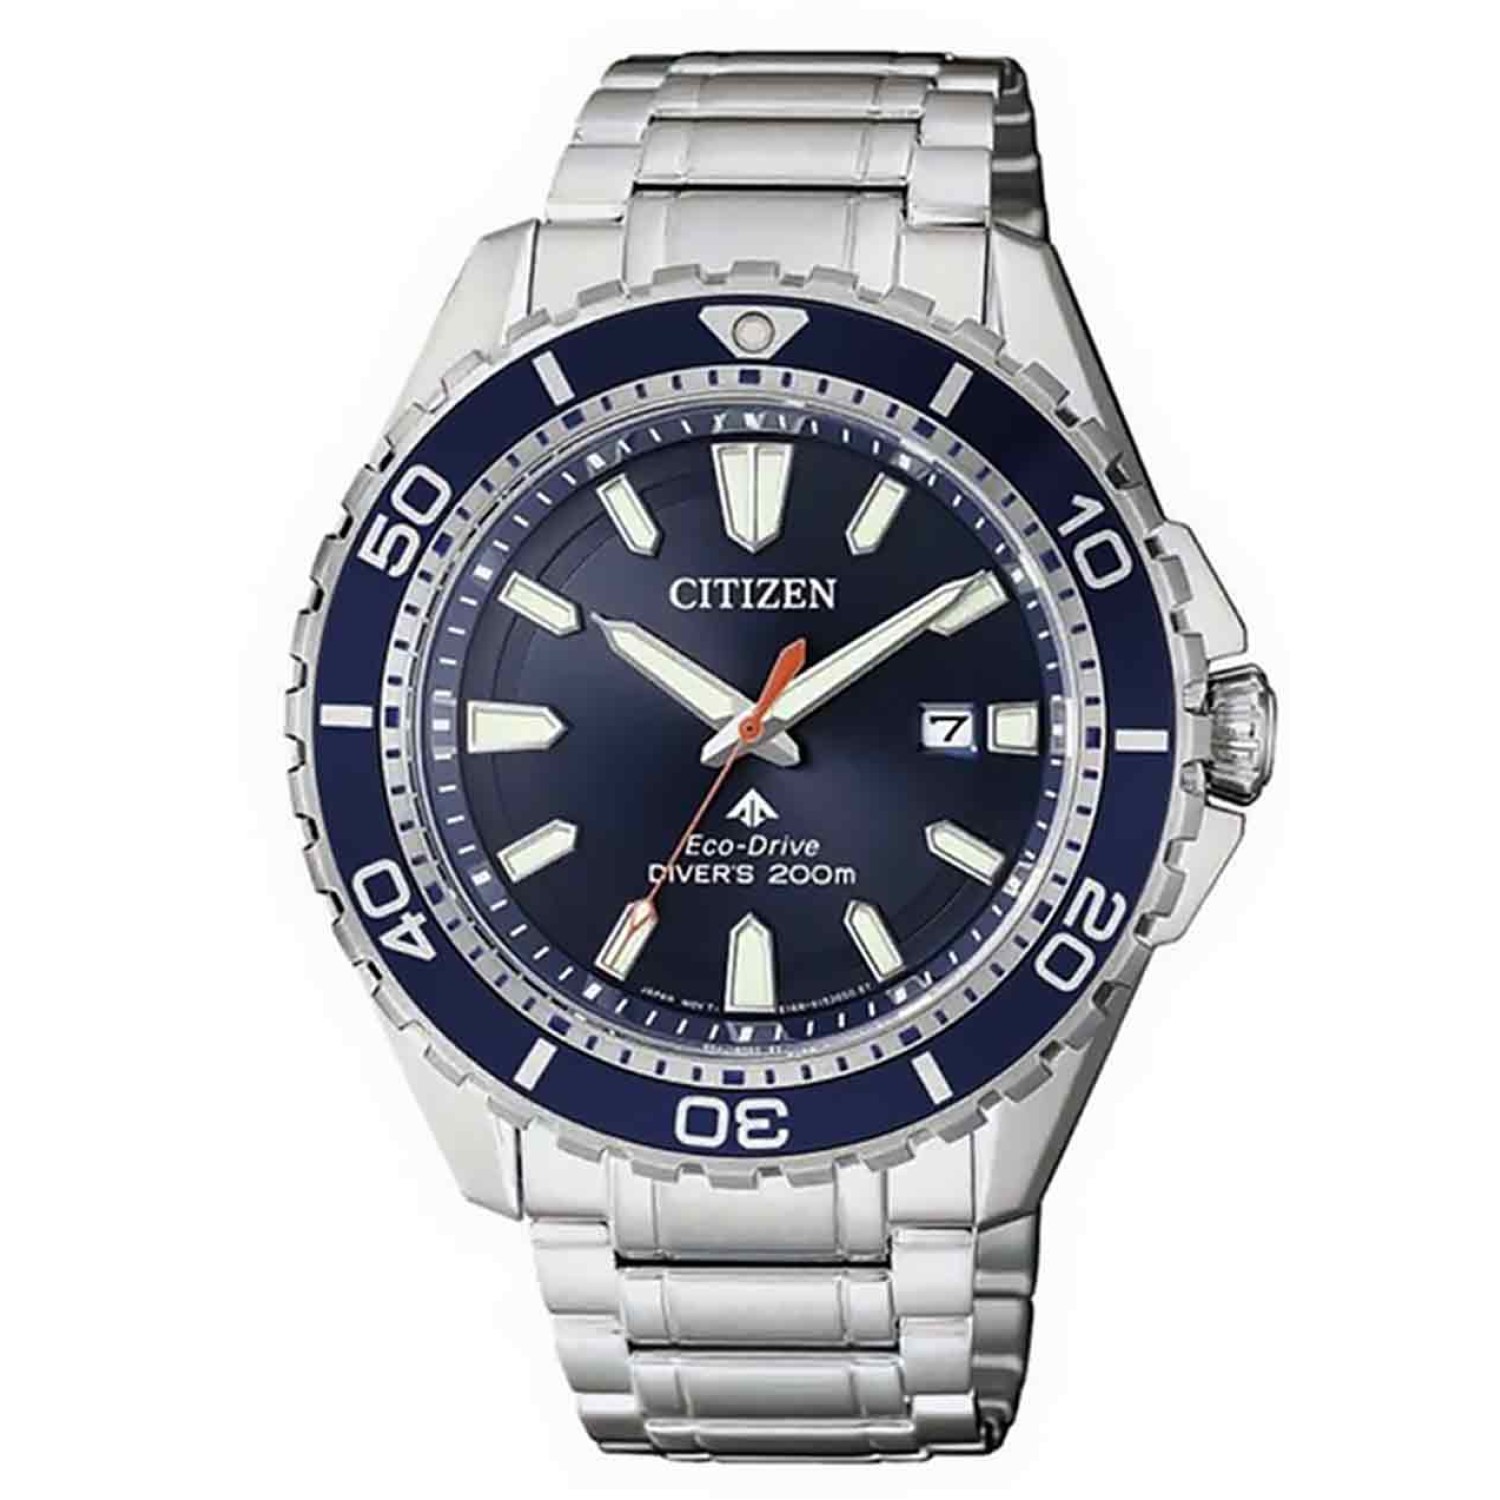 BN0191-80L Citizen Eco-Drive Dive Watch. With extensive functionality and durable construction, this watch is built to accompany you on your underwater adventures. When safety is concerned reliable performance is paramountOxipay is simply the easier way t